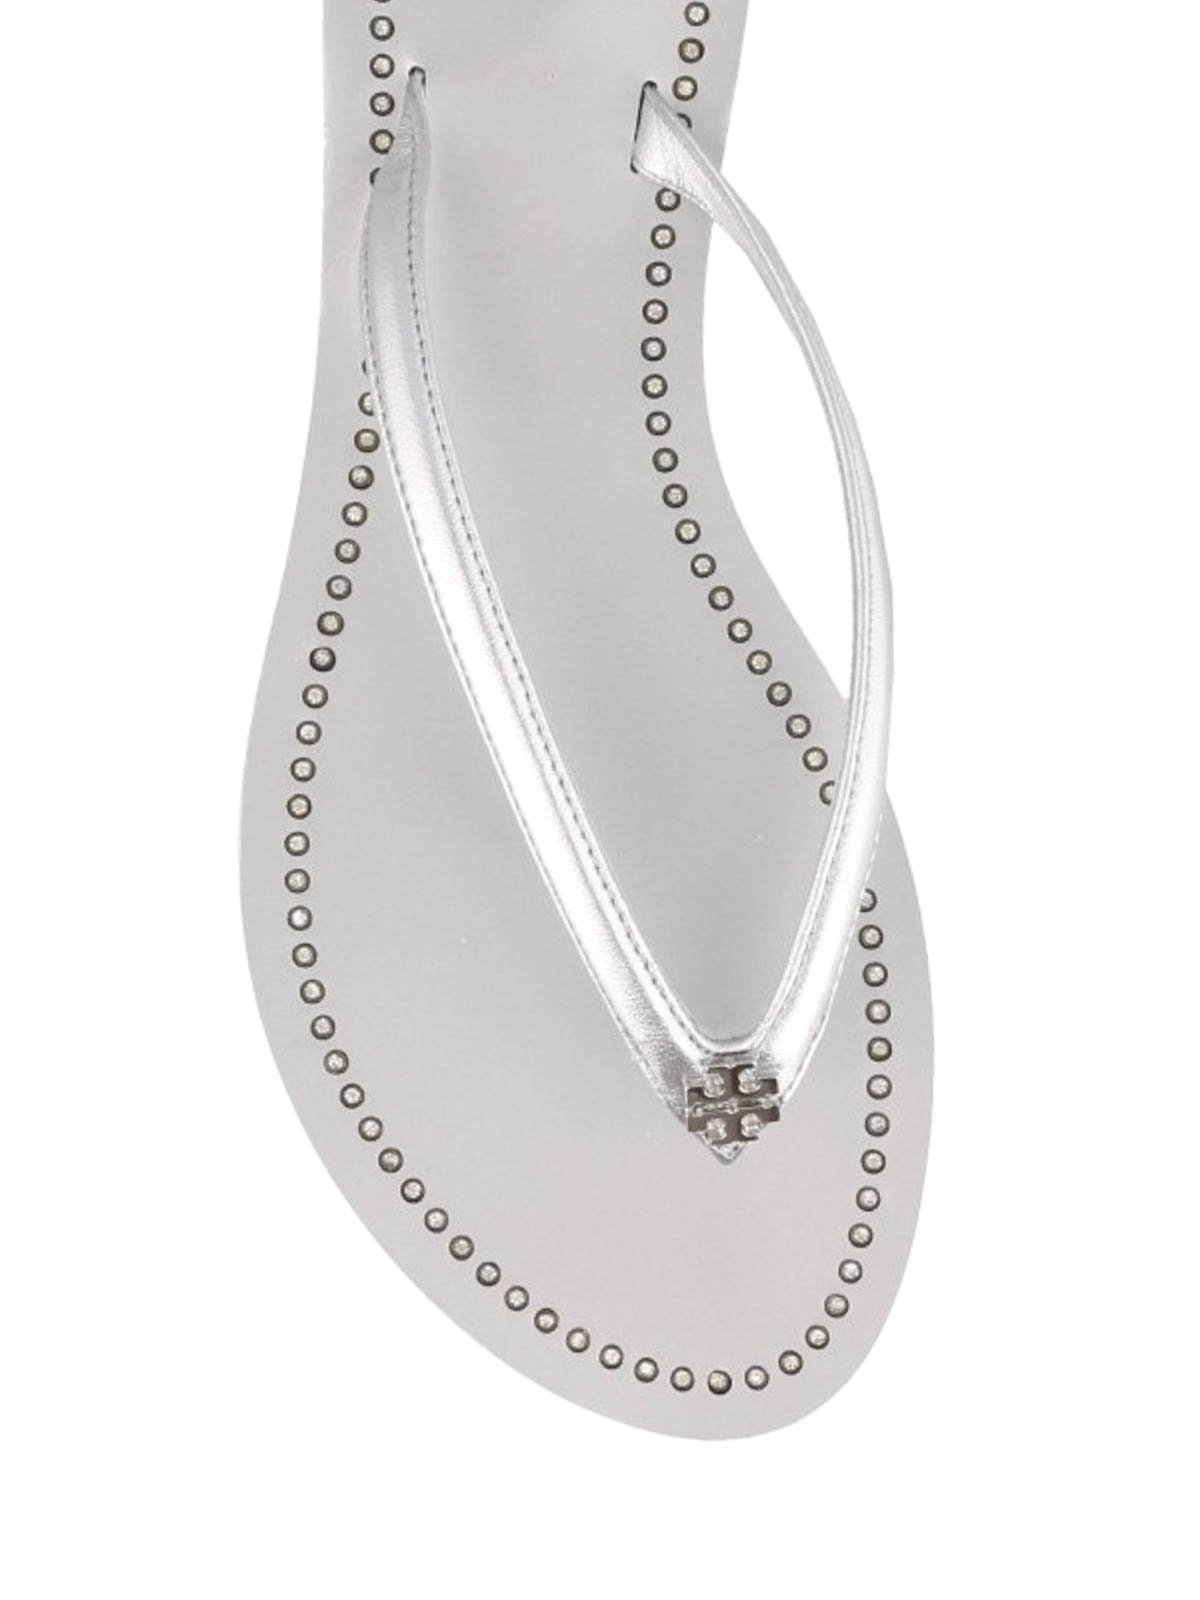 Sandals Tory Burch - Crystal embellished silver thong sandals - 53035040